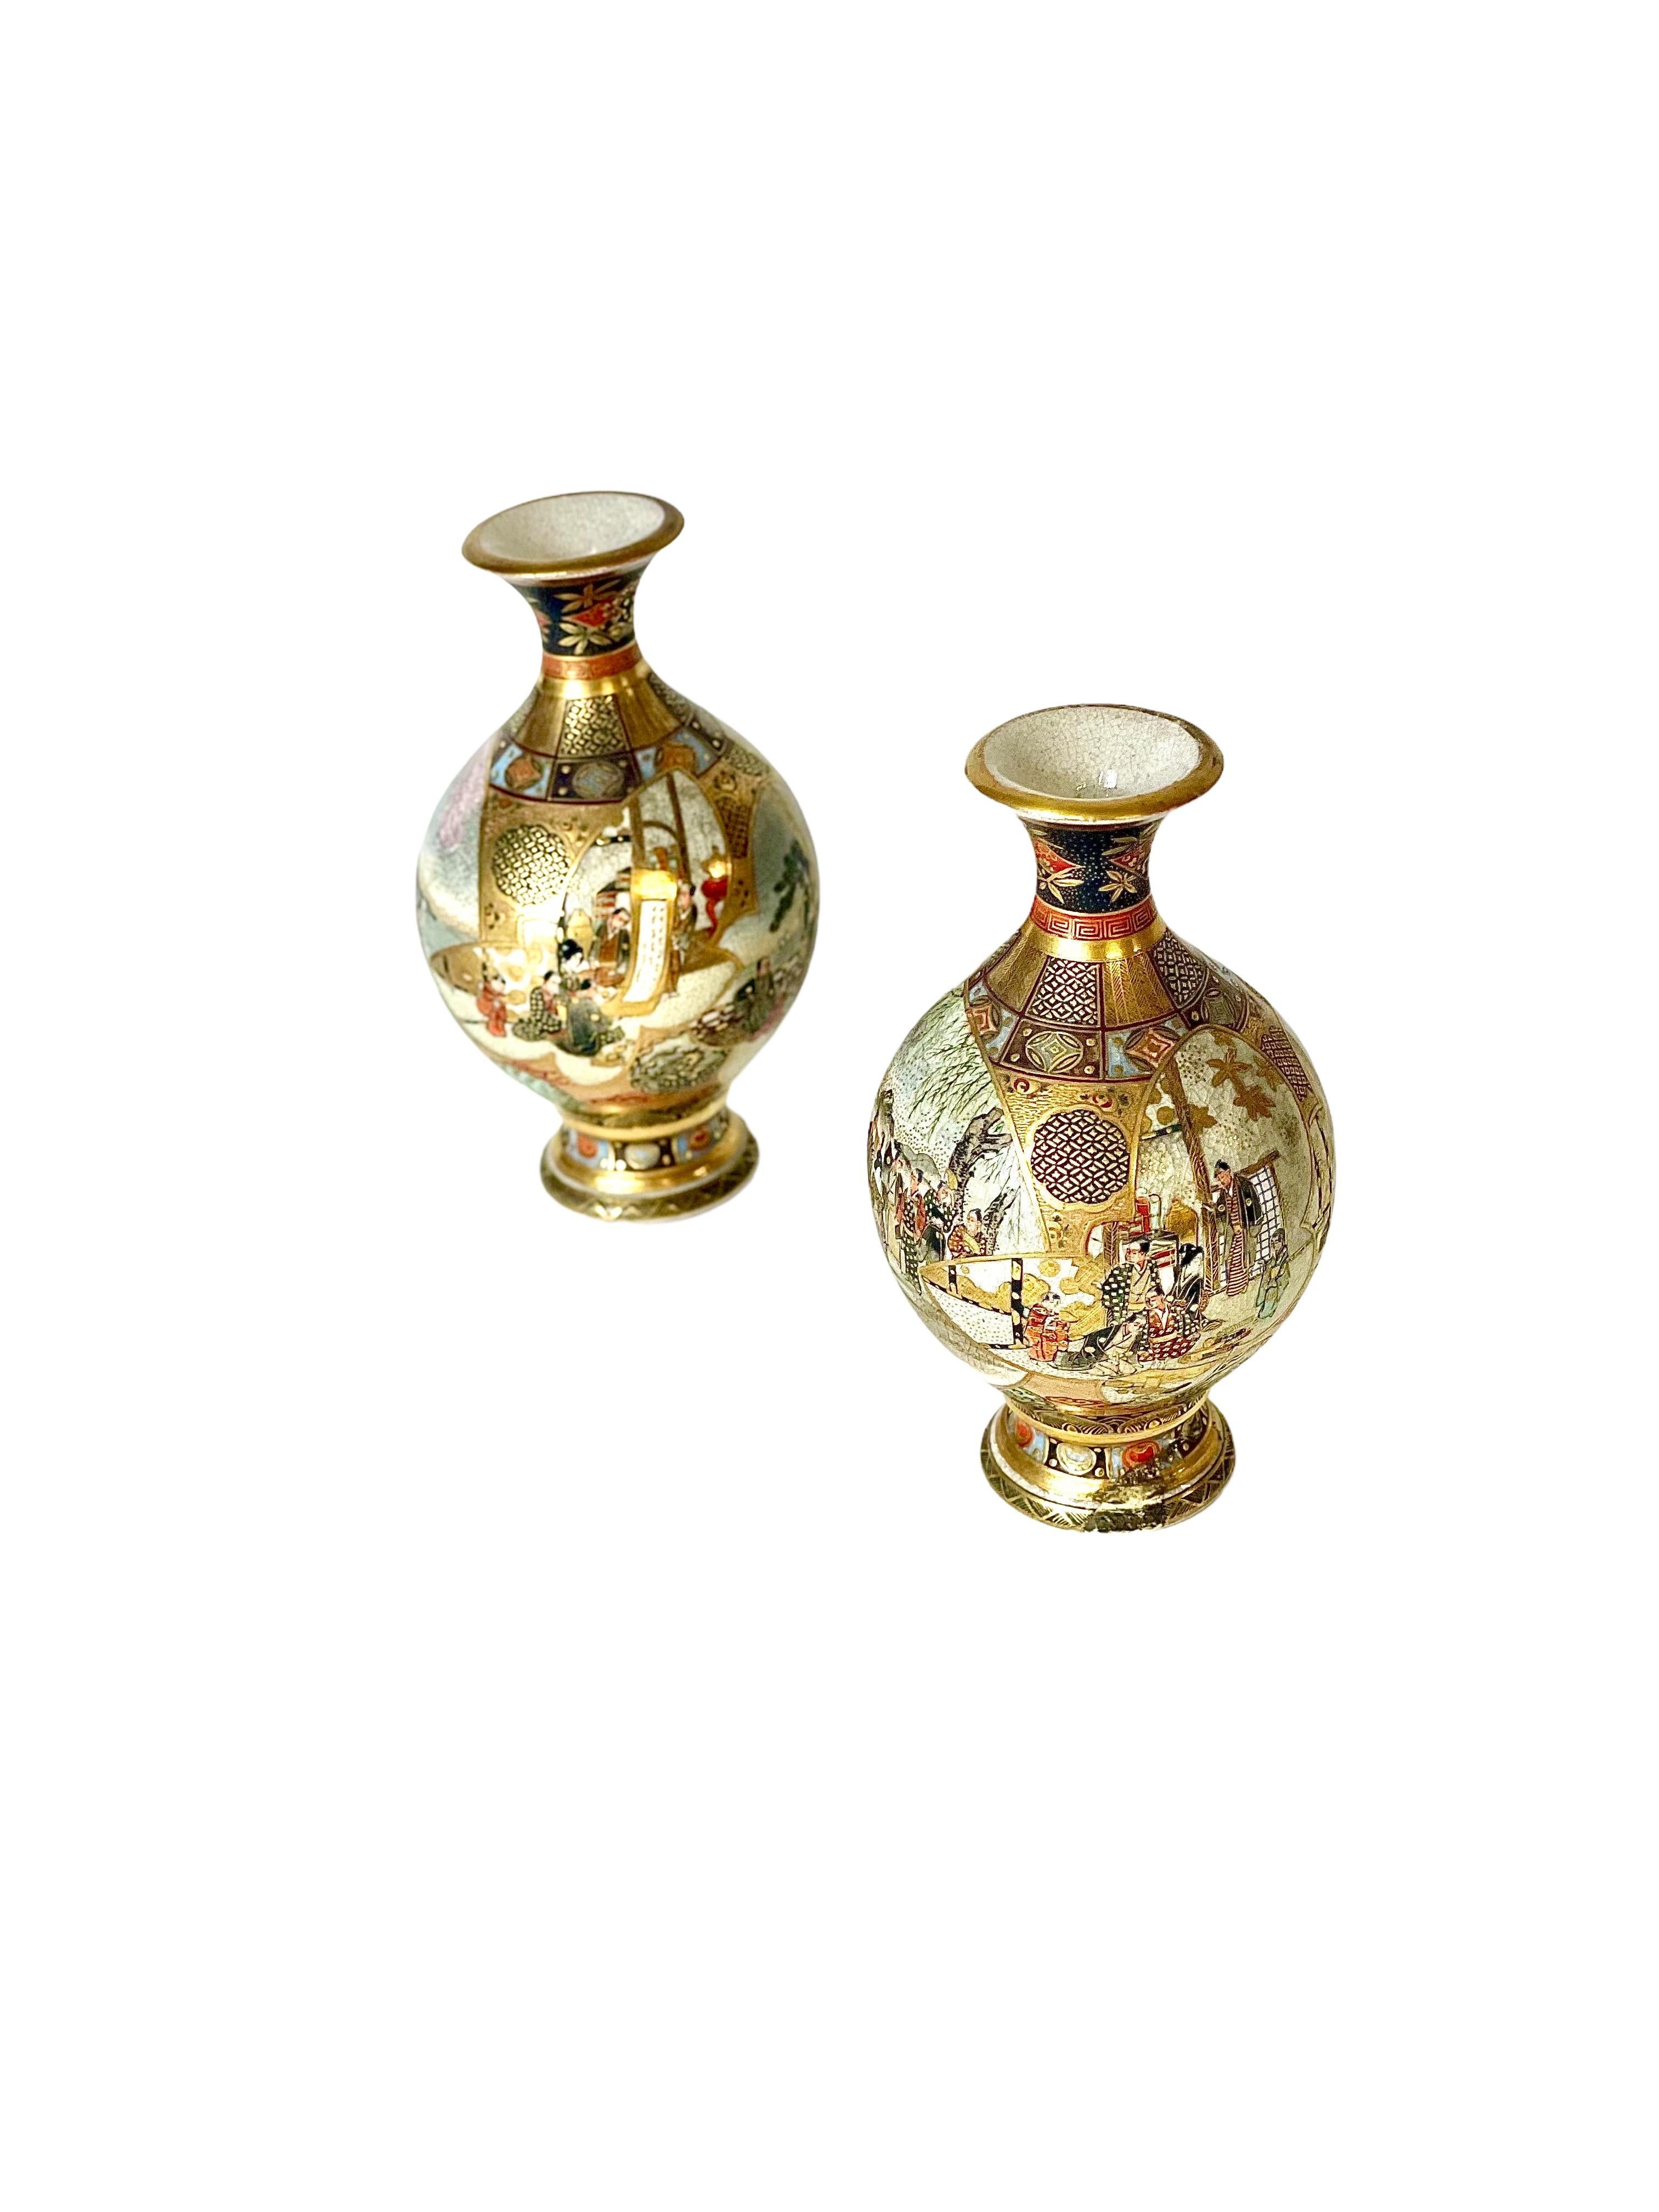 A fine pair of late 19th century Japanese earthenware Satsuma baluster vases, richly decorated with raised gilt work. These miniature vases feature figures in traditional dress playing out animated scenes within variously shaped reserves on each